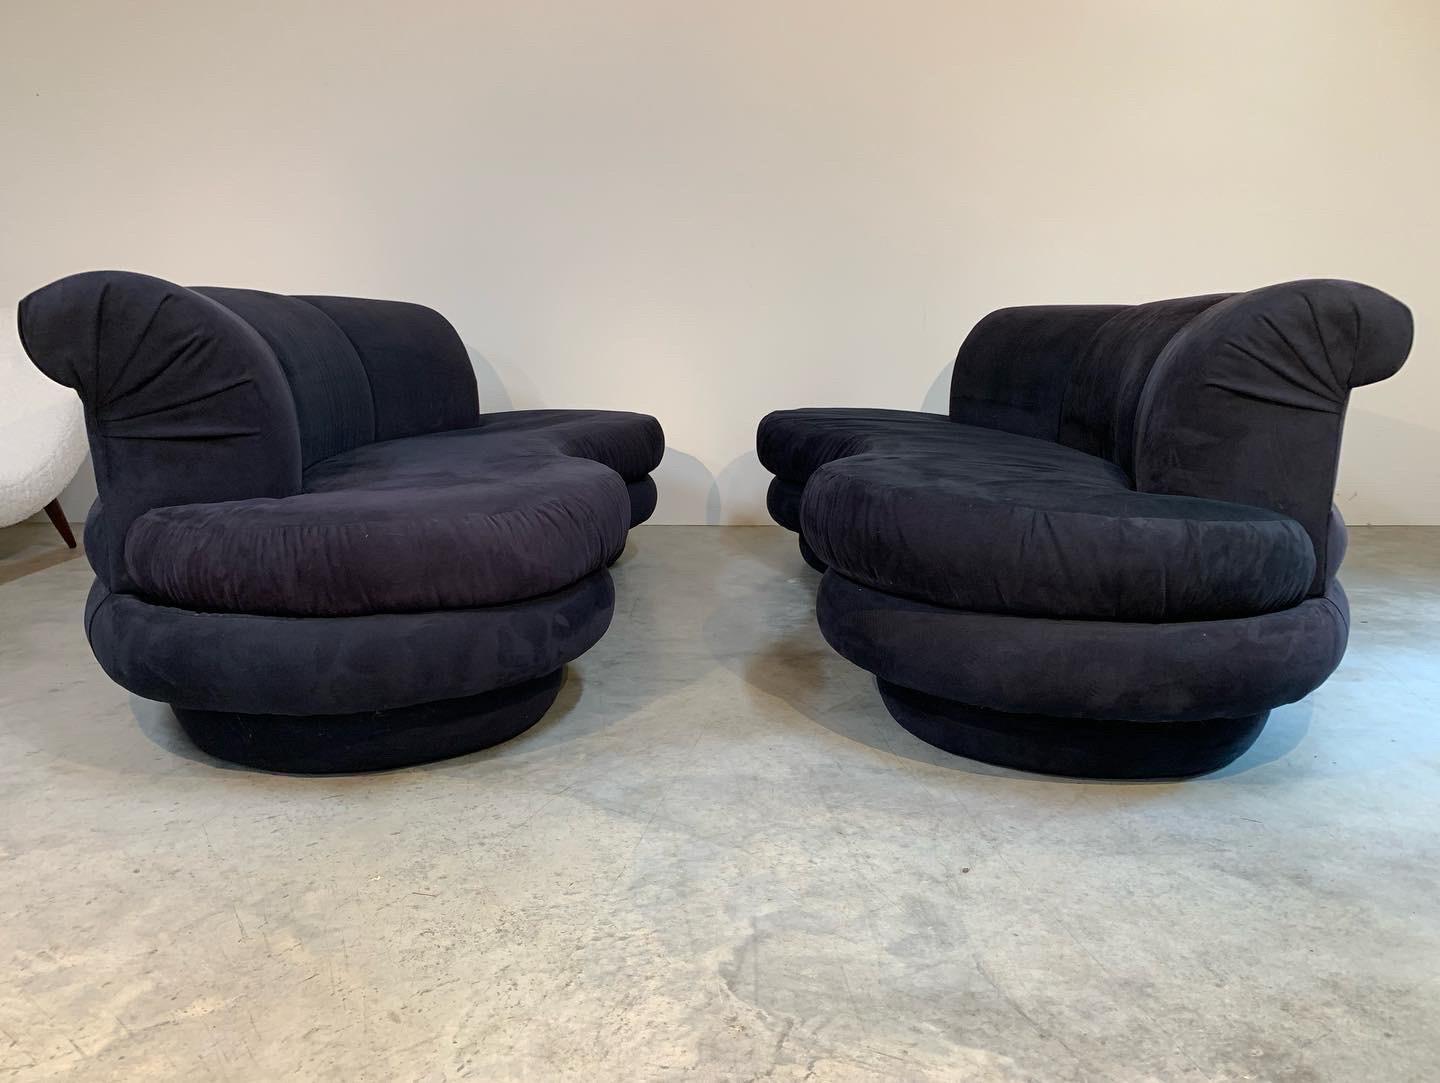 A gorgeous pair of apposing kidney sofas attributed to Kagan for Directional having deep blue Ultrasuede upholstery. Excellent form and incredibly comfortable. Price is for the pair! 
Great overall condition on both sofas. The original owner